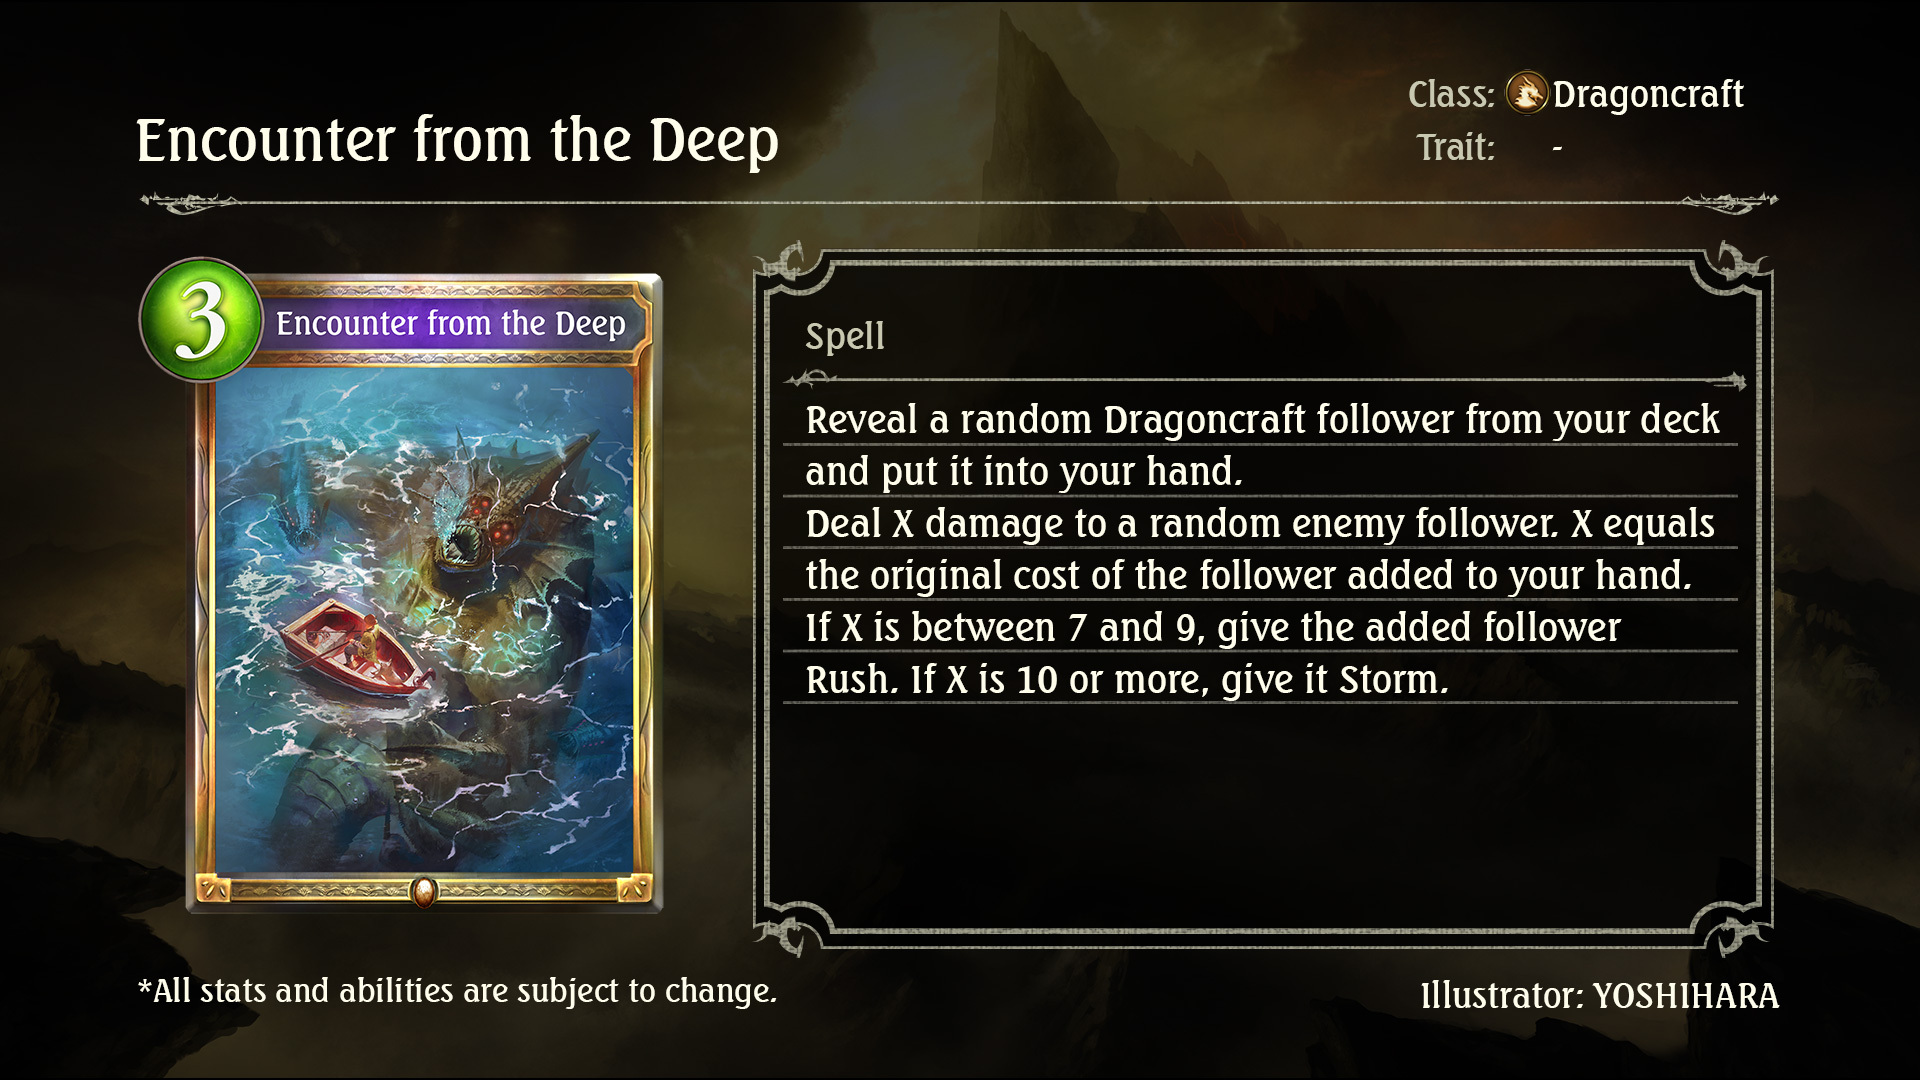 Shadowverse New Storm Over Rivayle Card Reveal Encounter From The Deep This Dragoncraft Card Is A Part Of The Additional Cards For Storm Over Rivayle Additional Cards Will Be Released